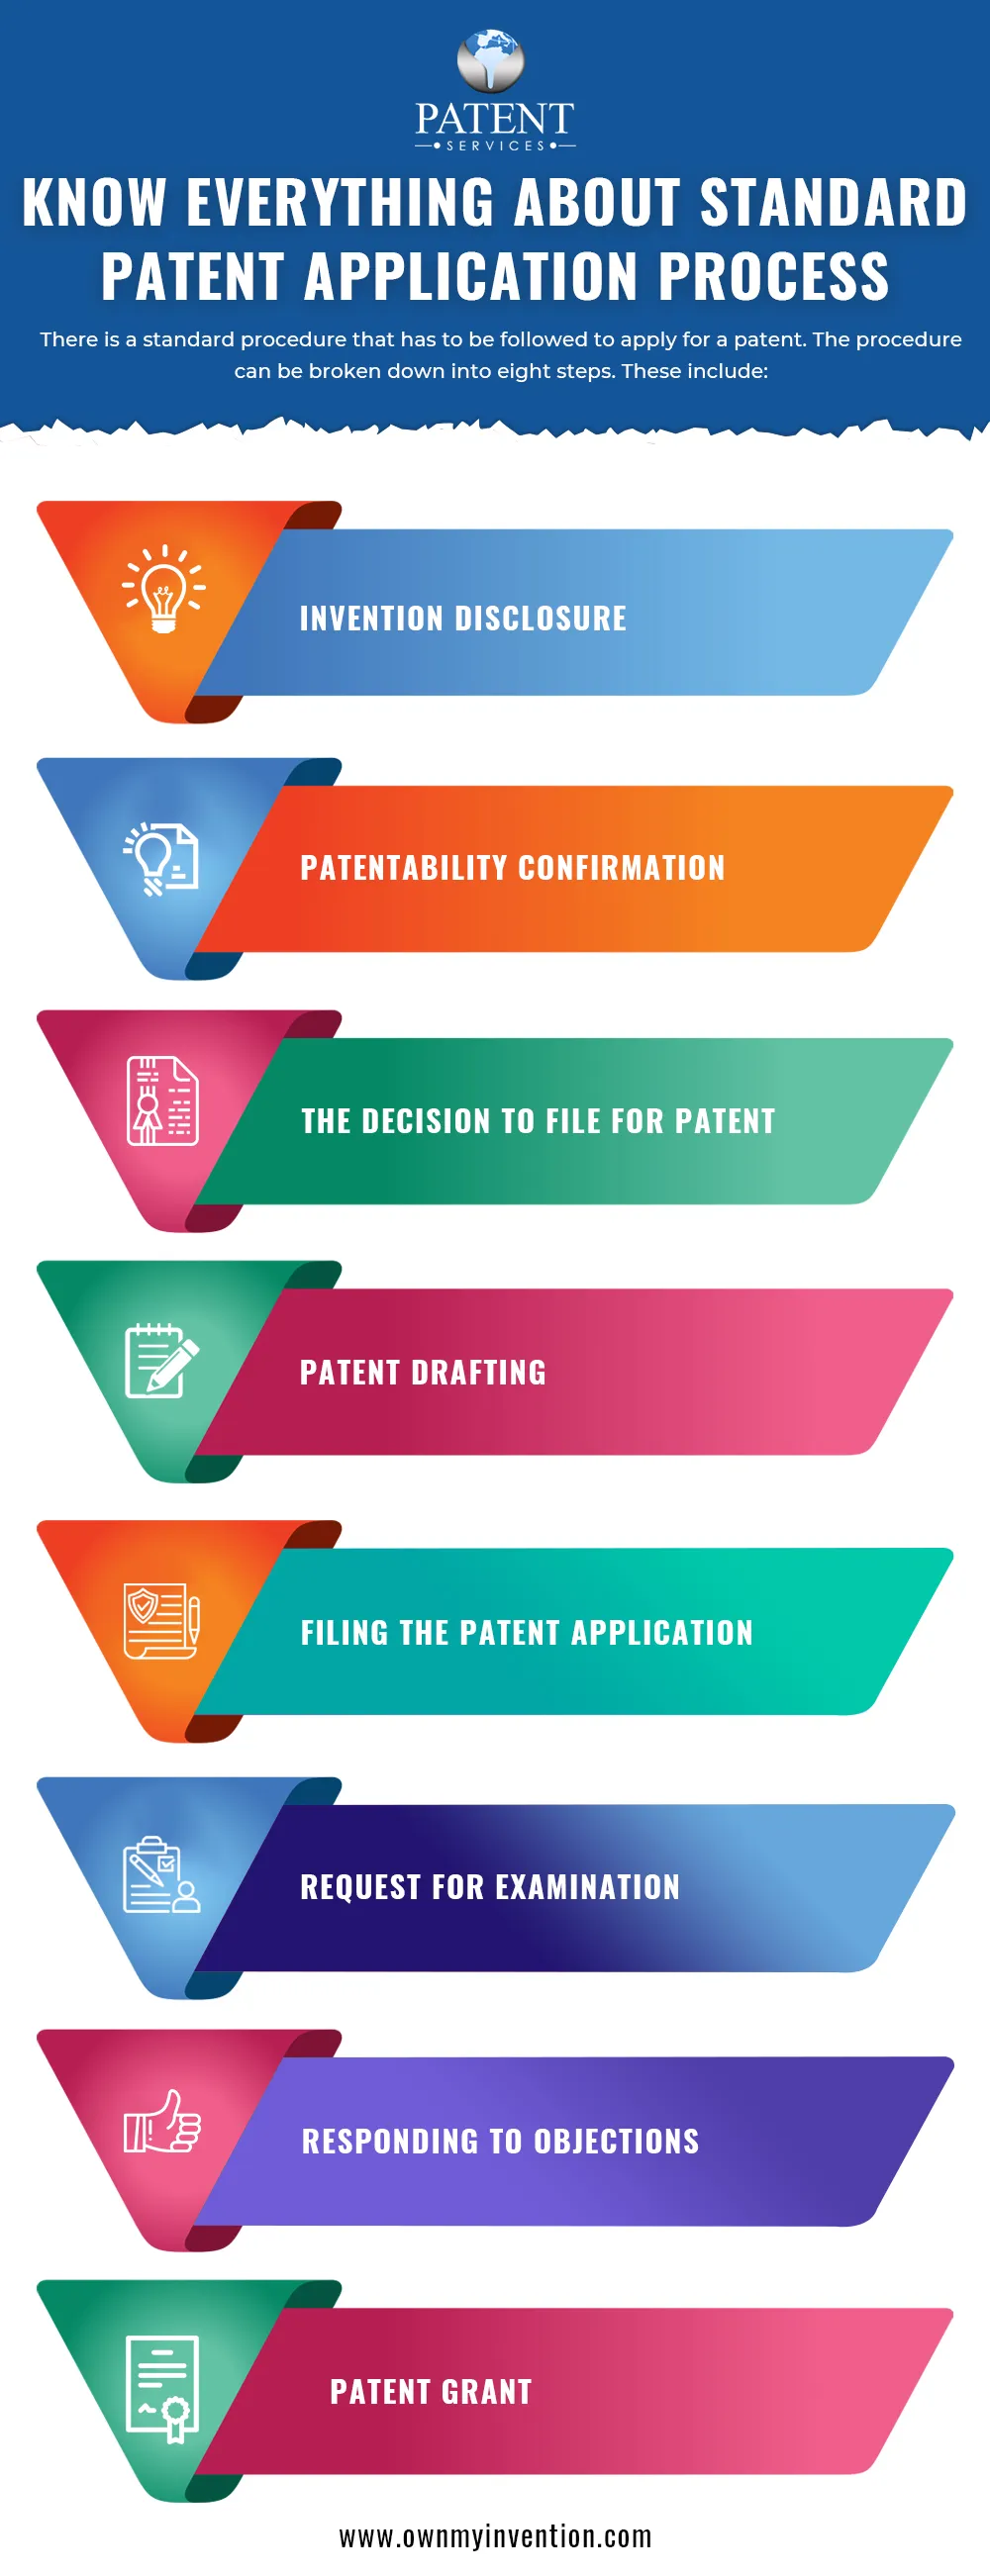 Know Everything About Standard Patent Application Process